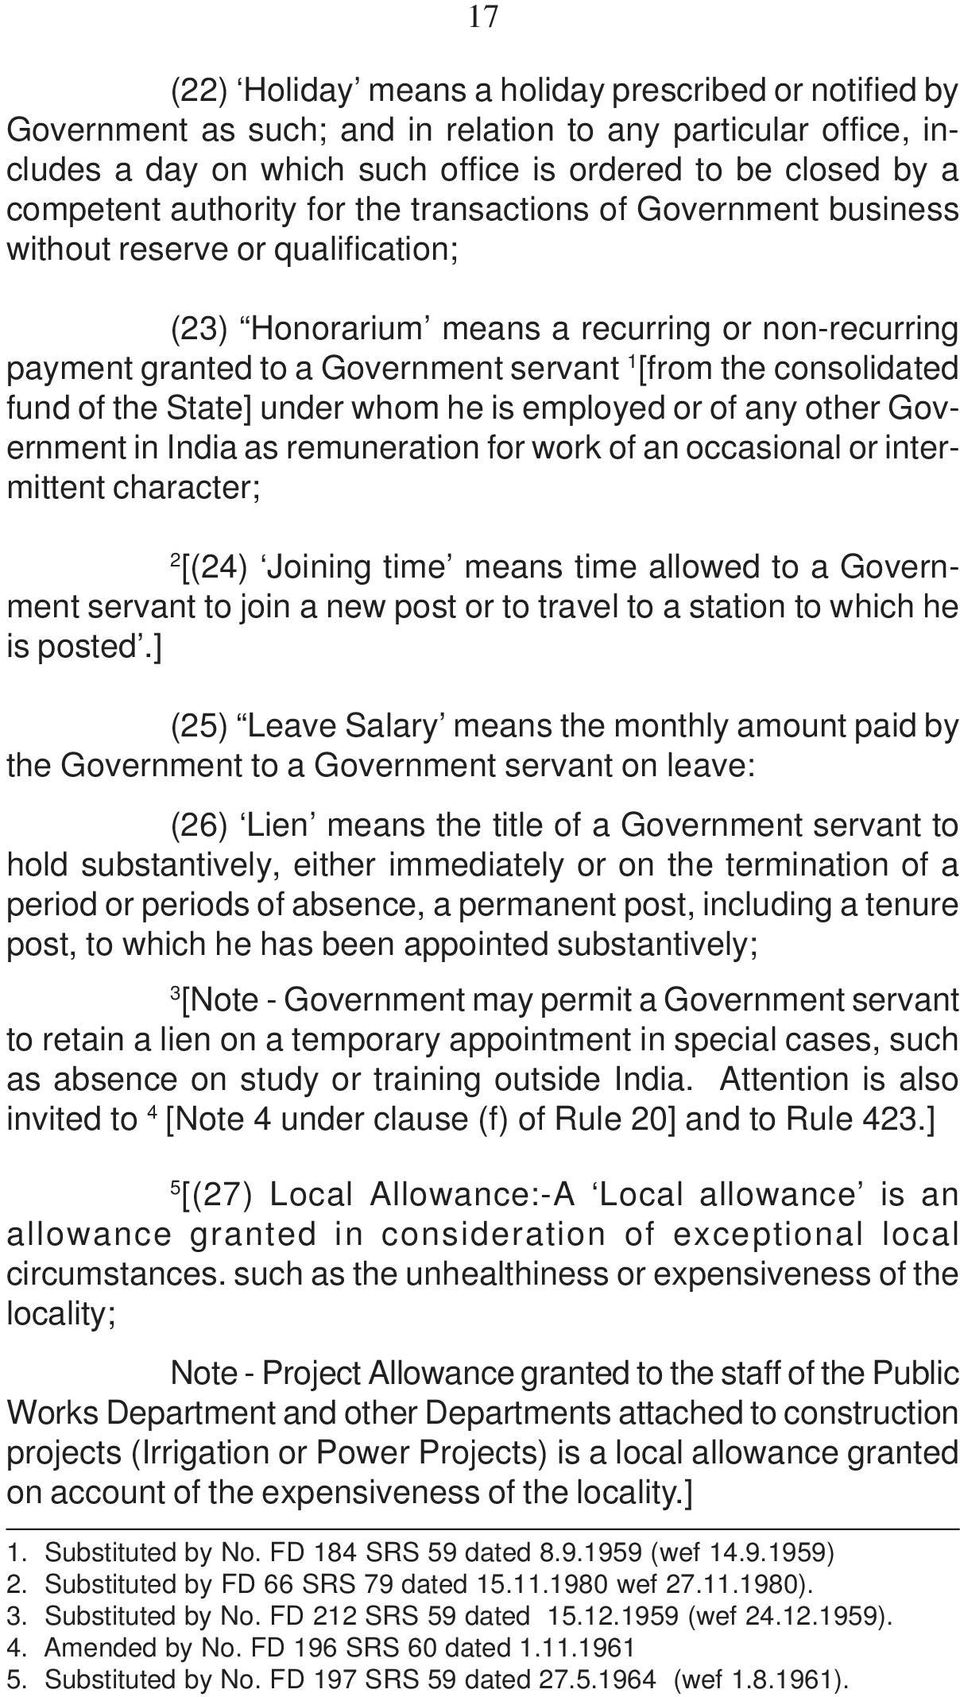 consolidated fund of the State] under whom he is employed or of any other Government in India as remuneration for work of an occasional or intermittent character; 2 [(24) Joining time means time